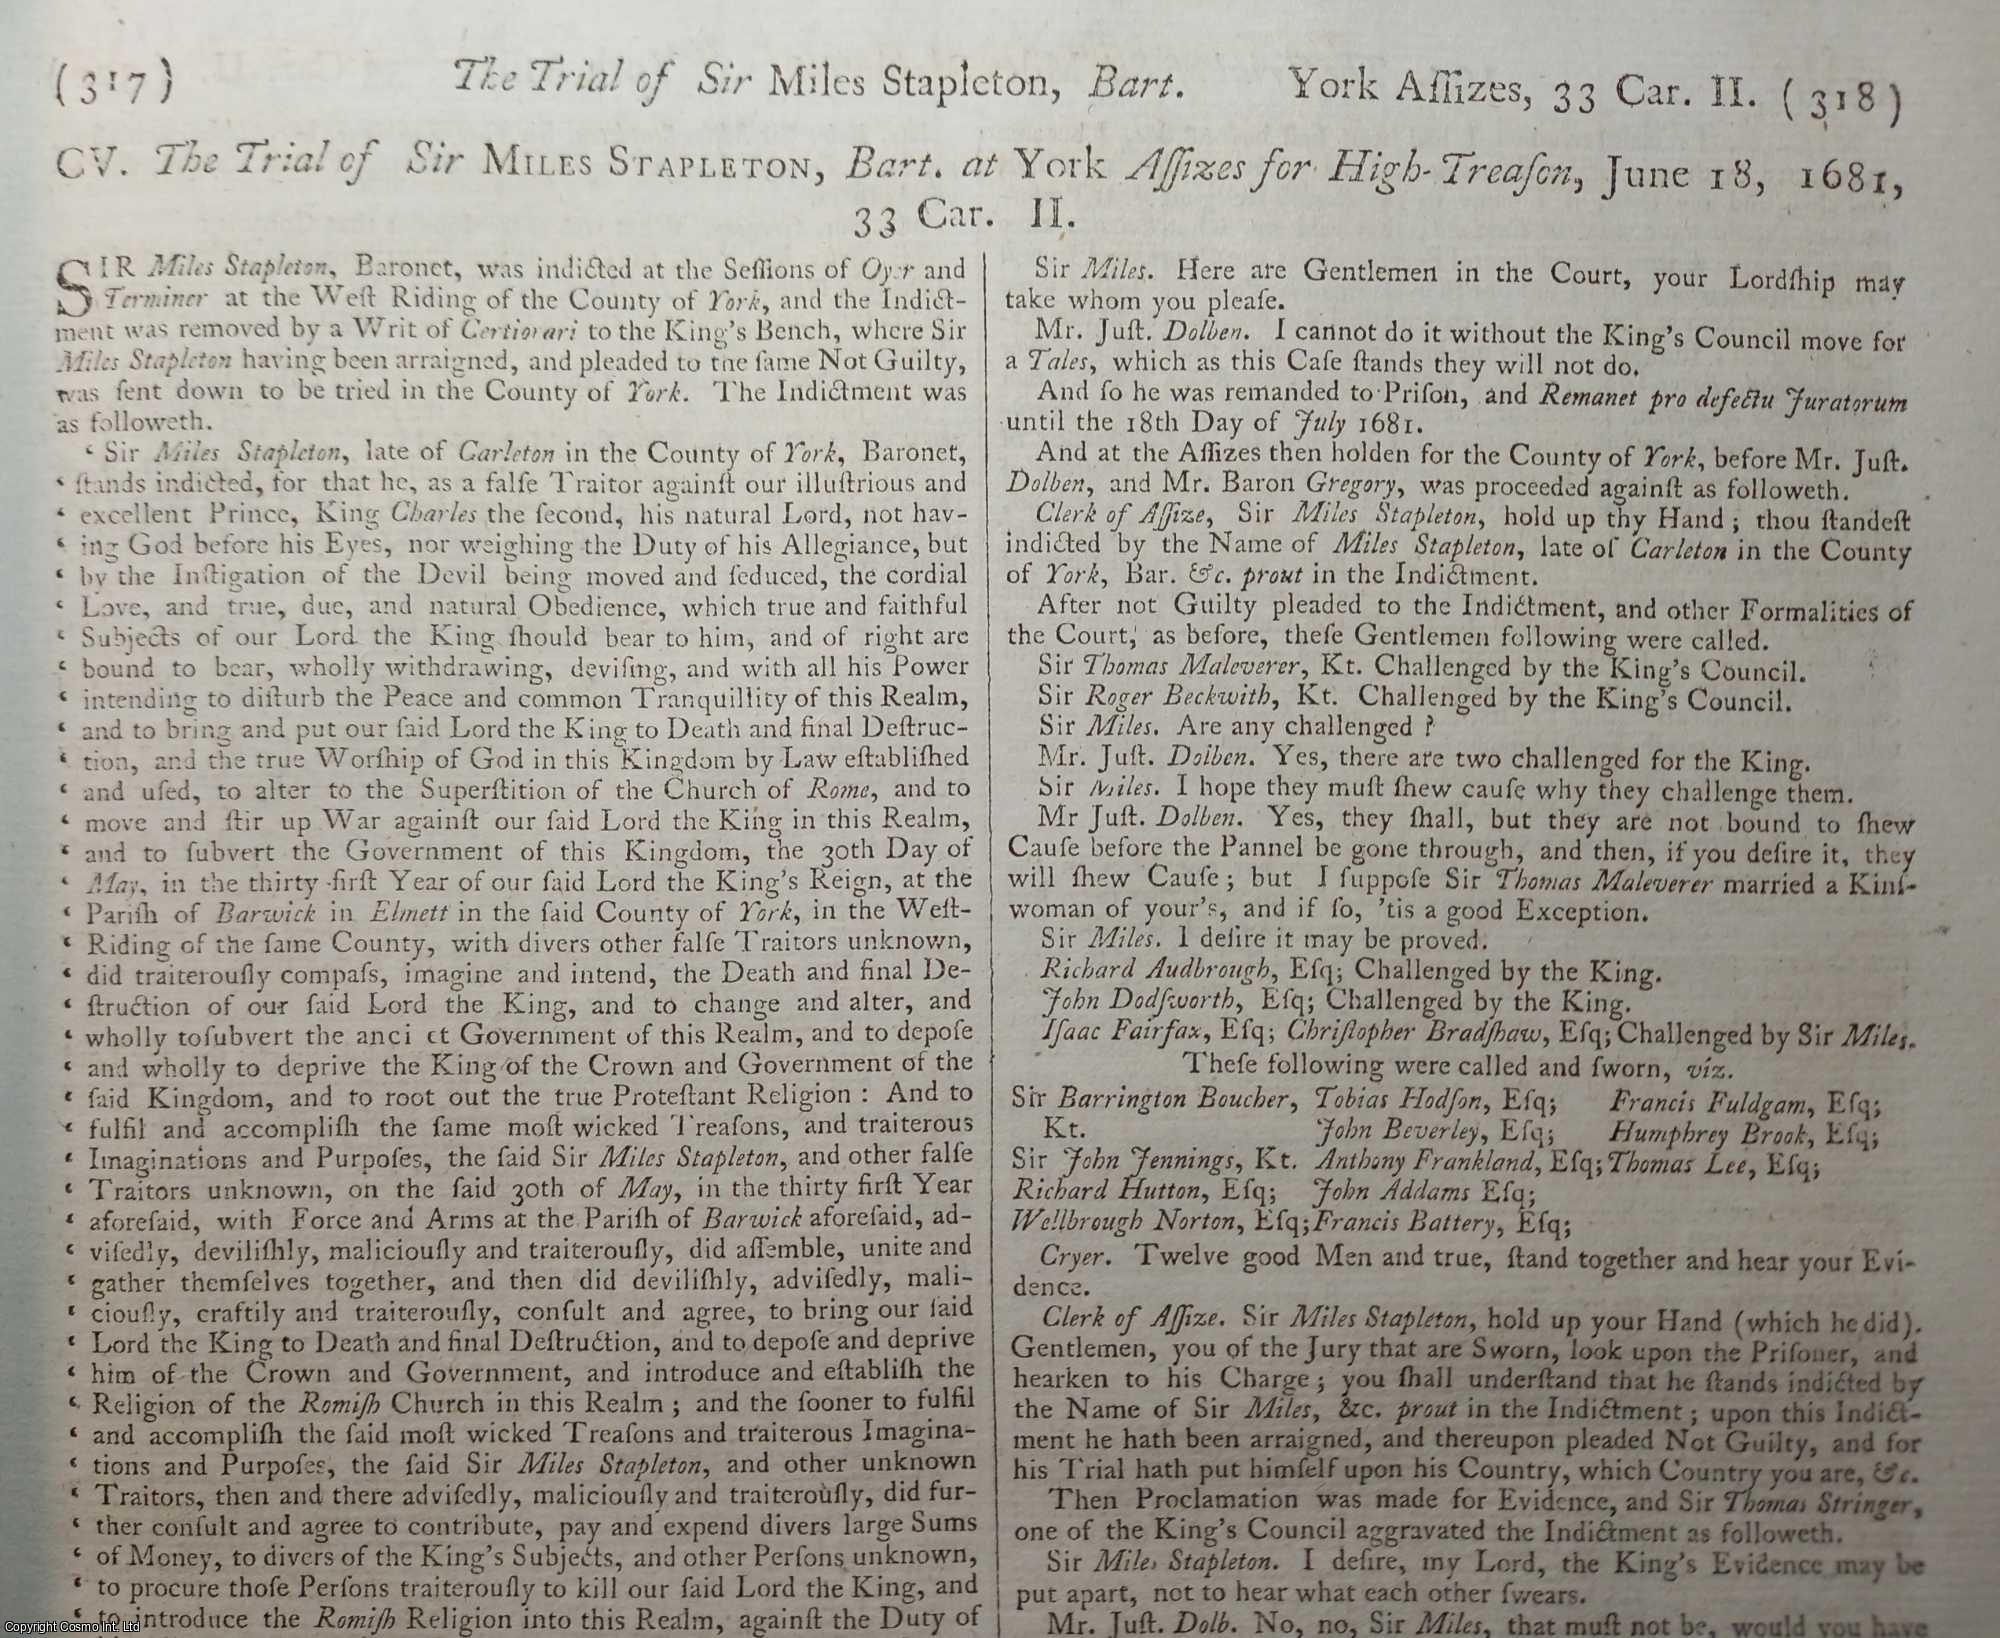 [Trial] - The Trial of Sir Miles Stapleton, at York Assizes, for High Treason, 1681. An original article from the Collected State Trials.